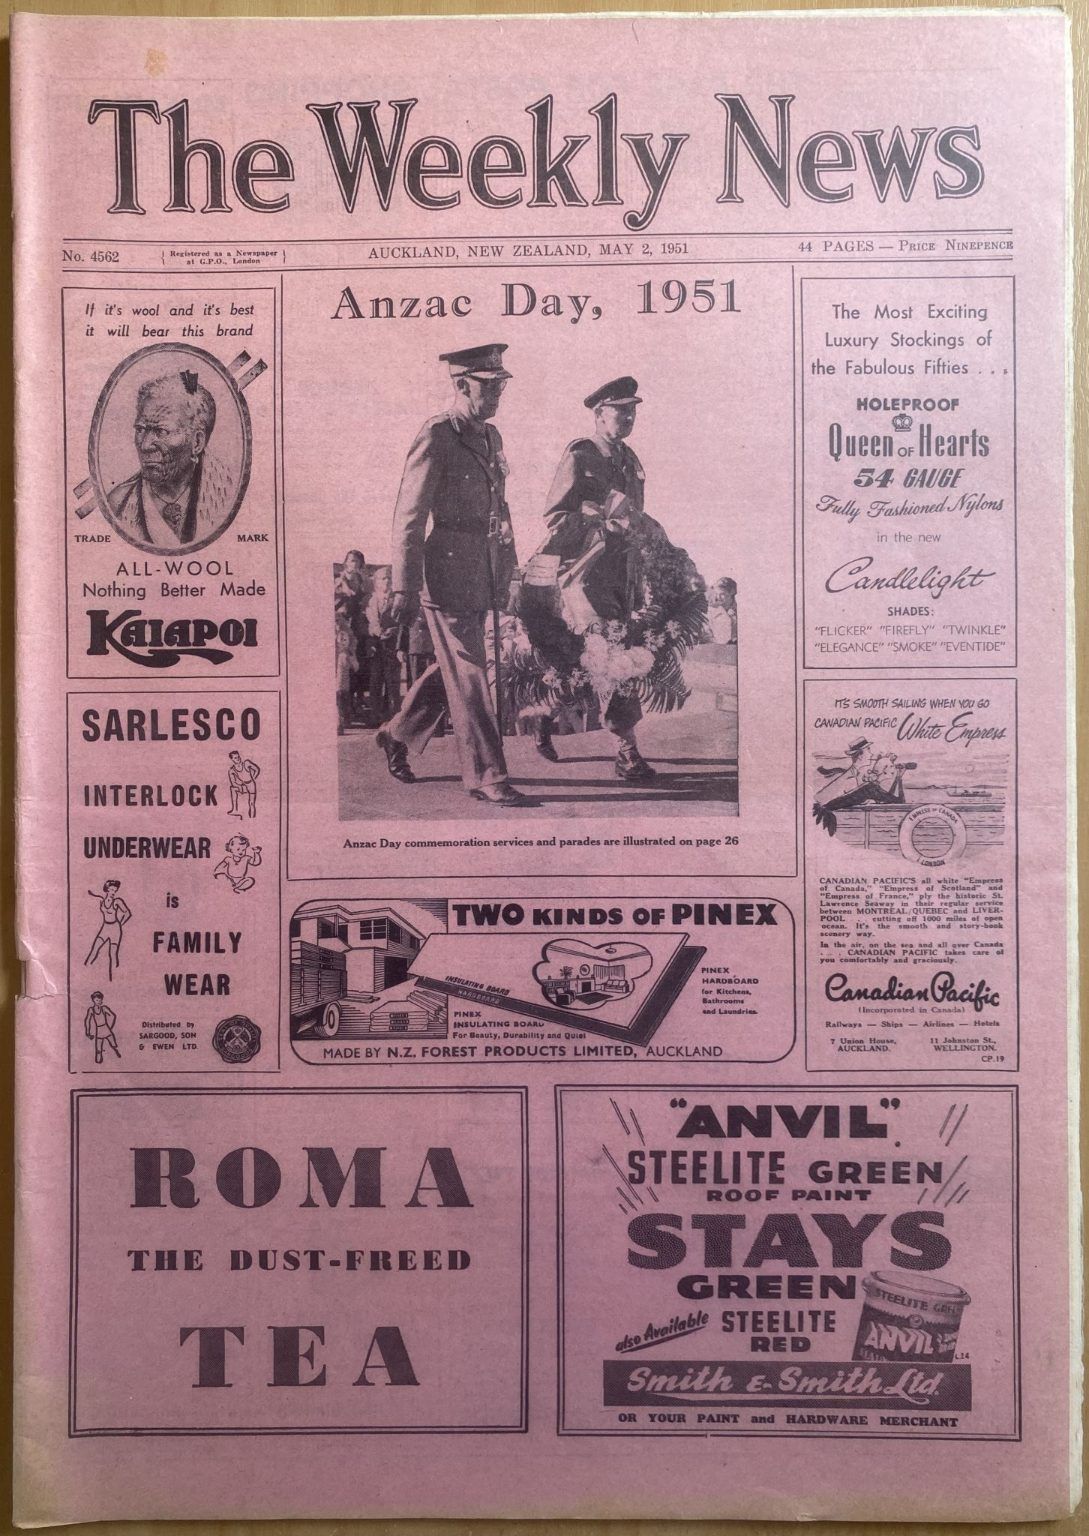 OLD NEWSPAPER: The Weekly News, No. 4562, 2 May 1951